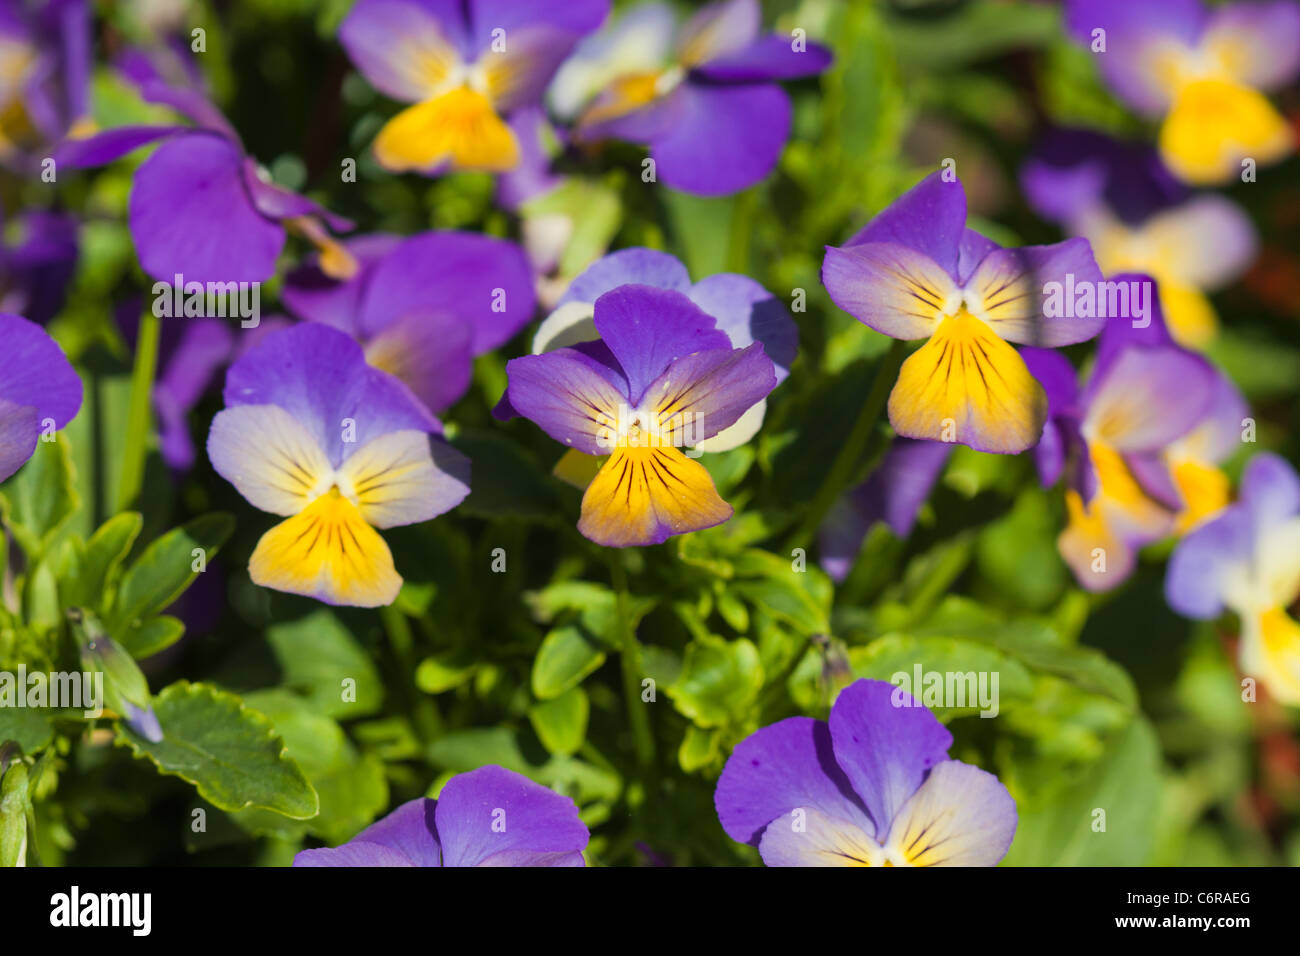 Violet yellow pansies in green nature Stock Photo